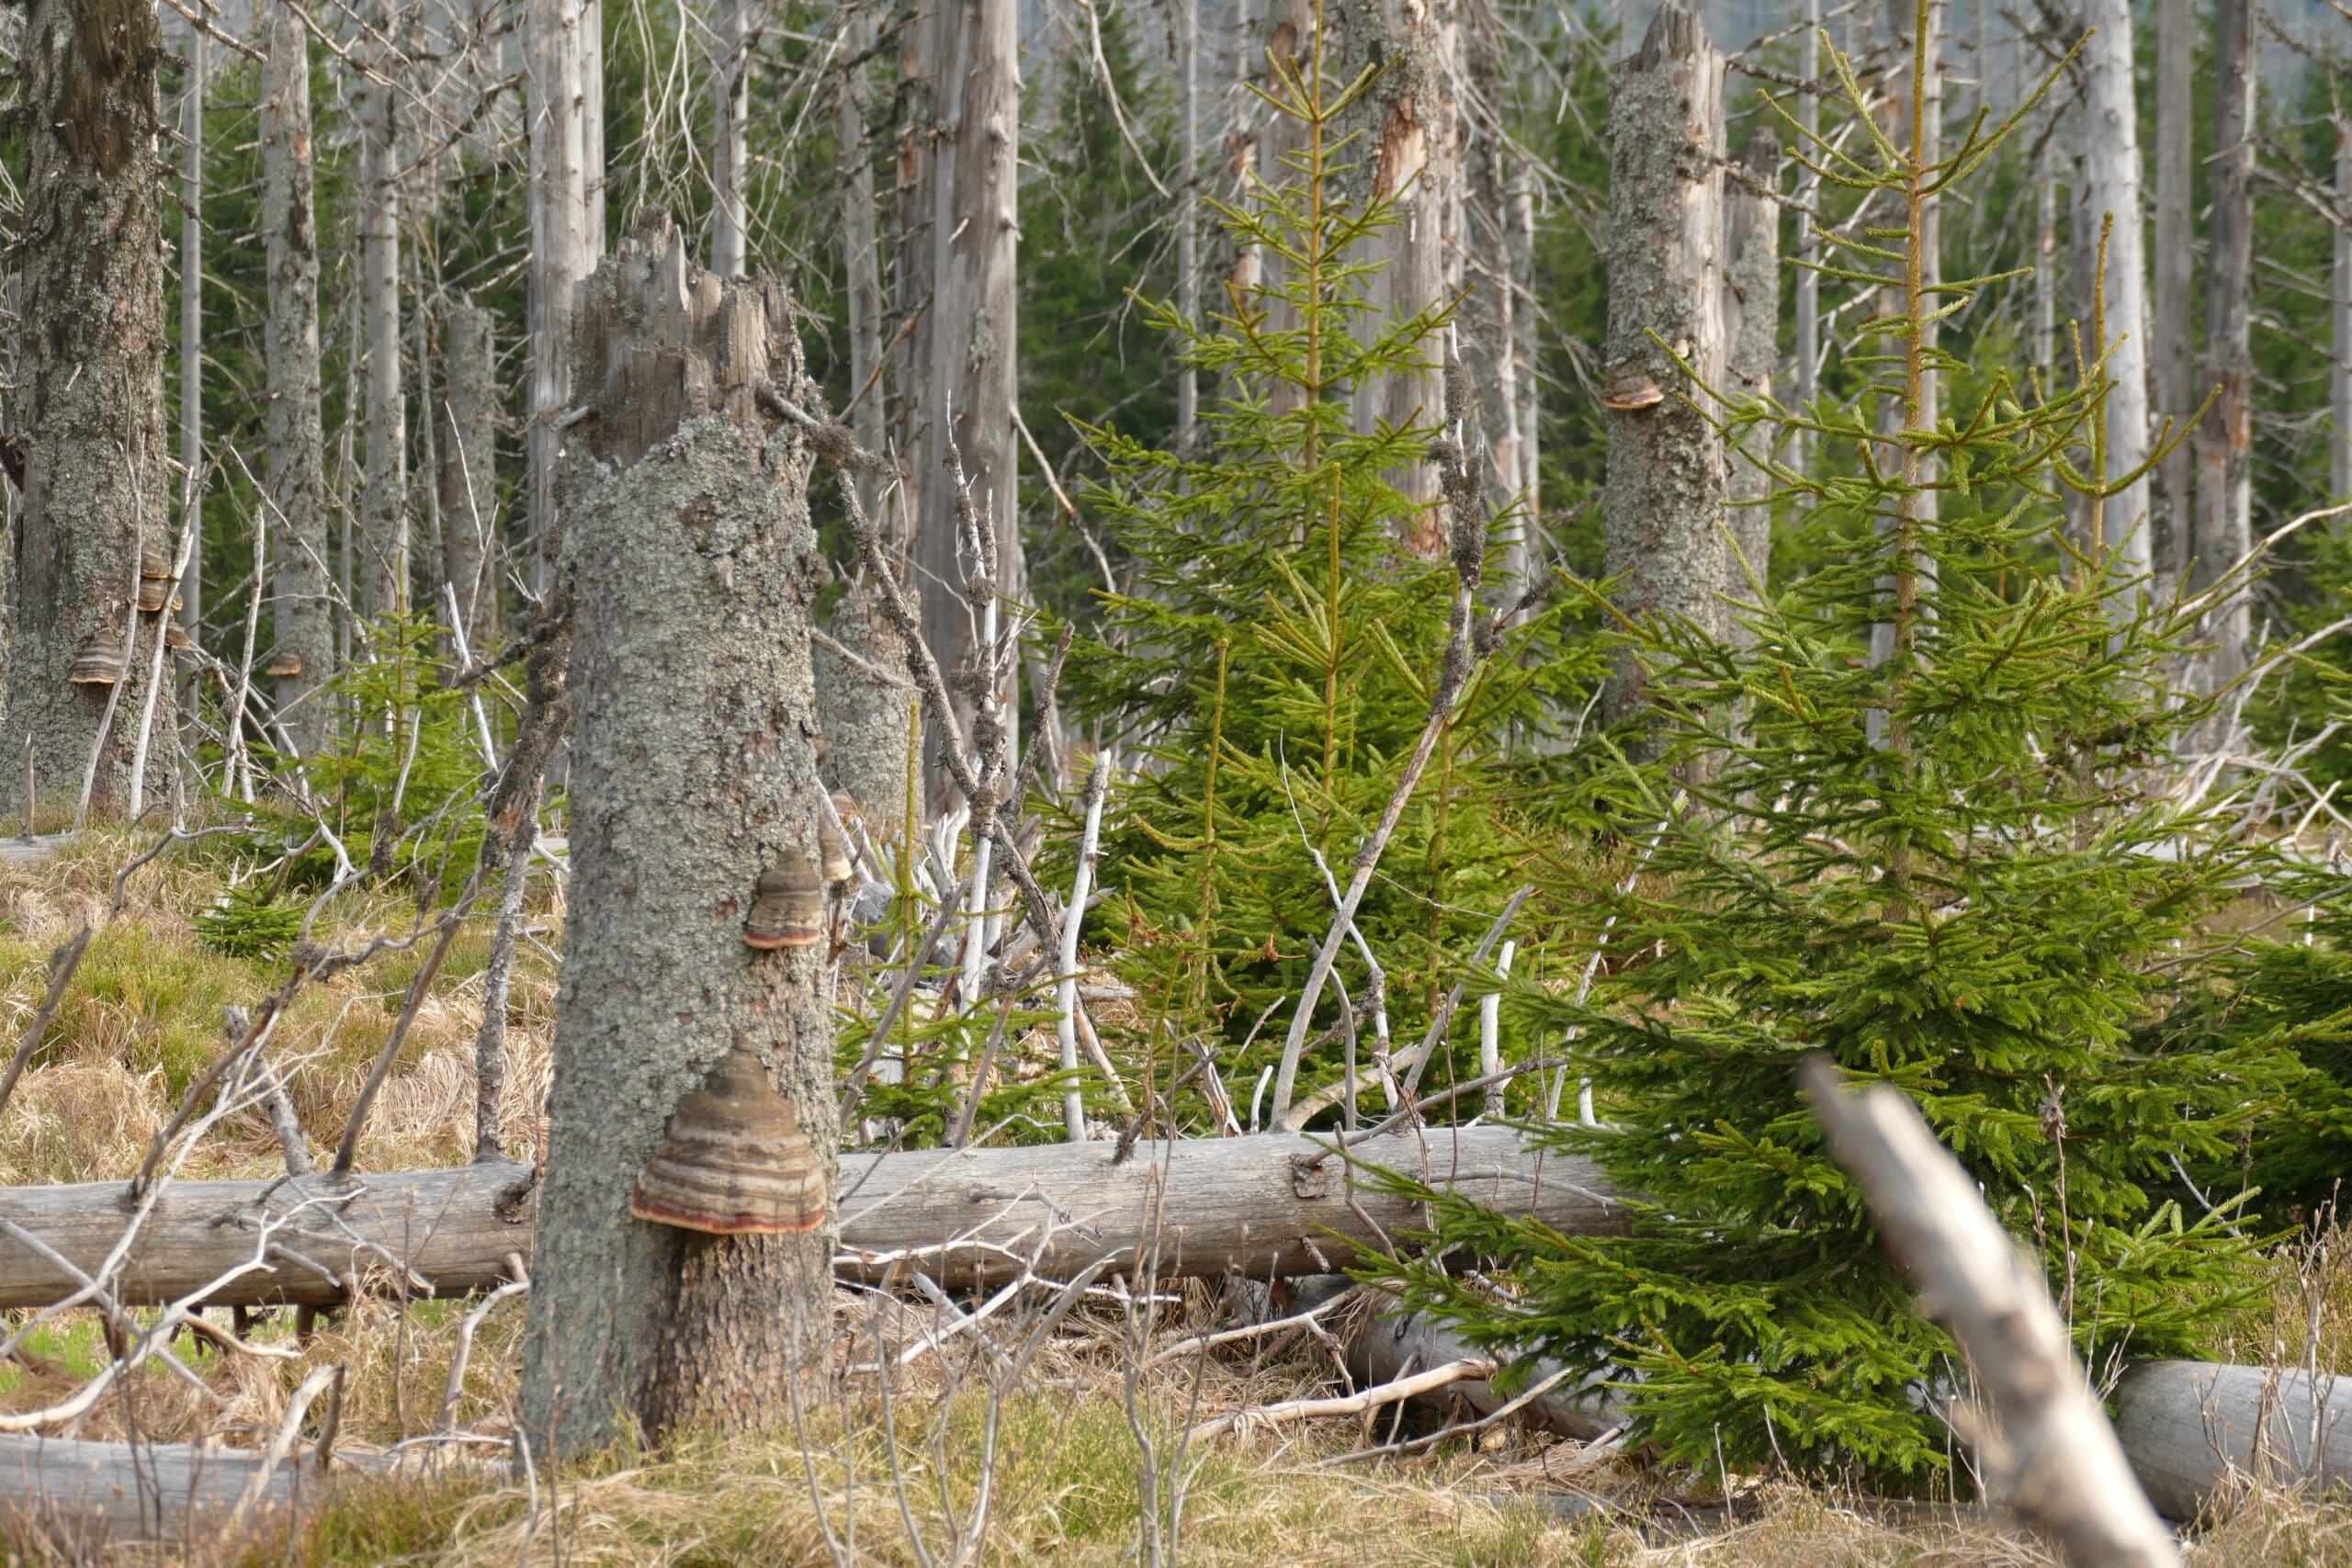 The dead spruce trees are very important sources of nutrients for many species living in the forest